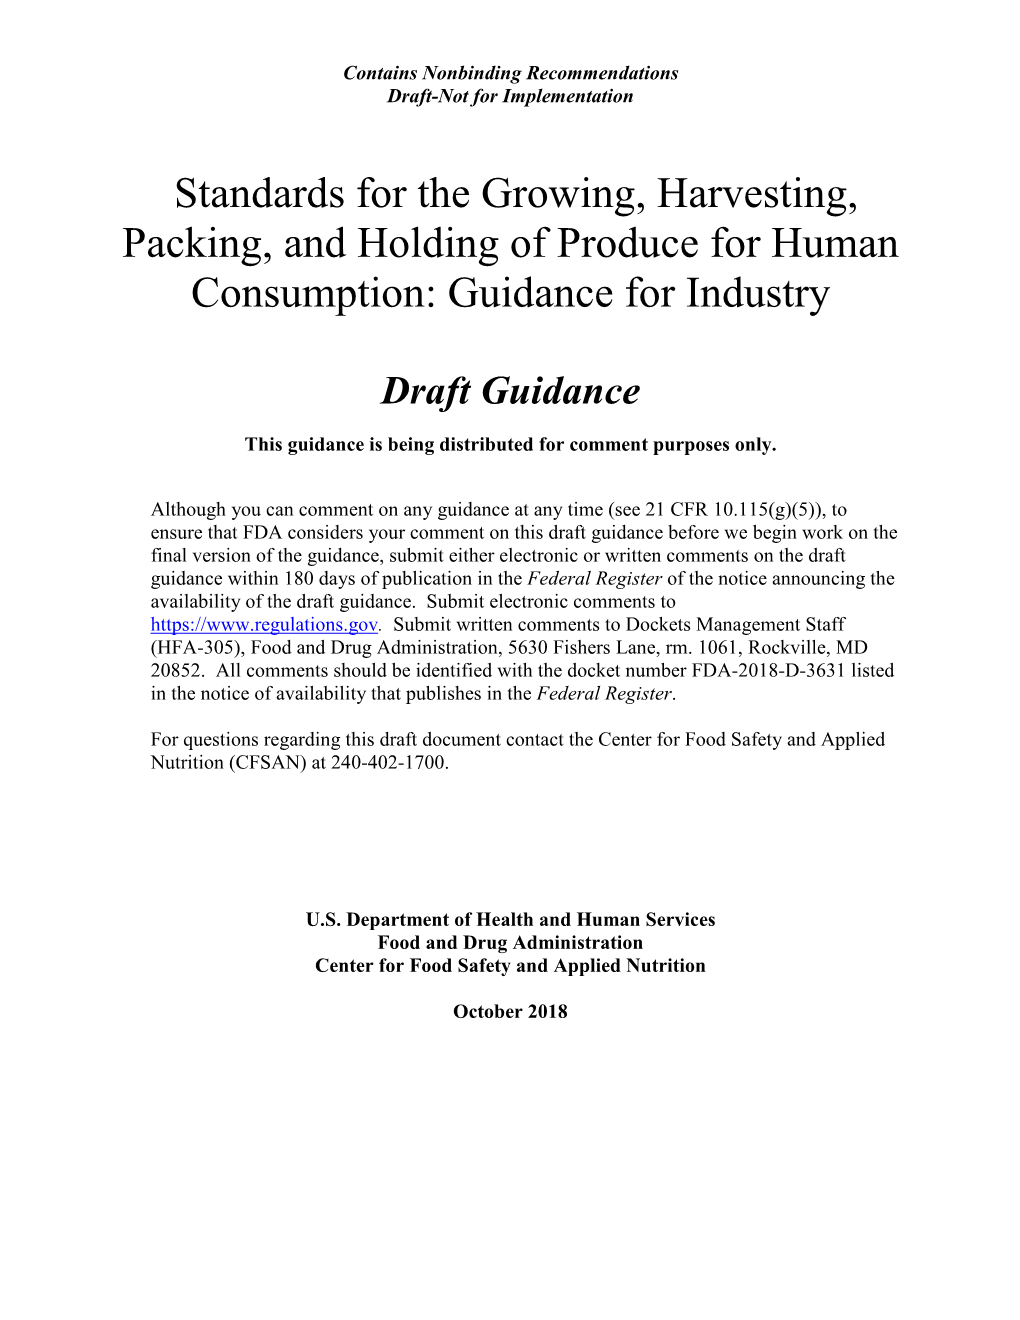 Standards for the Growing, Harvesting, Packing, and Holding of Produce for Human Consumption: Guidance for Industry